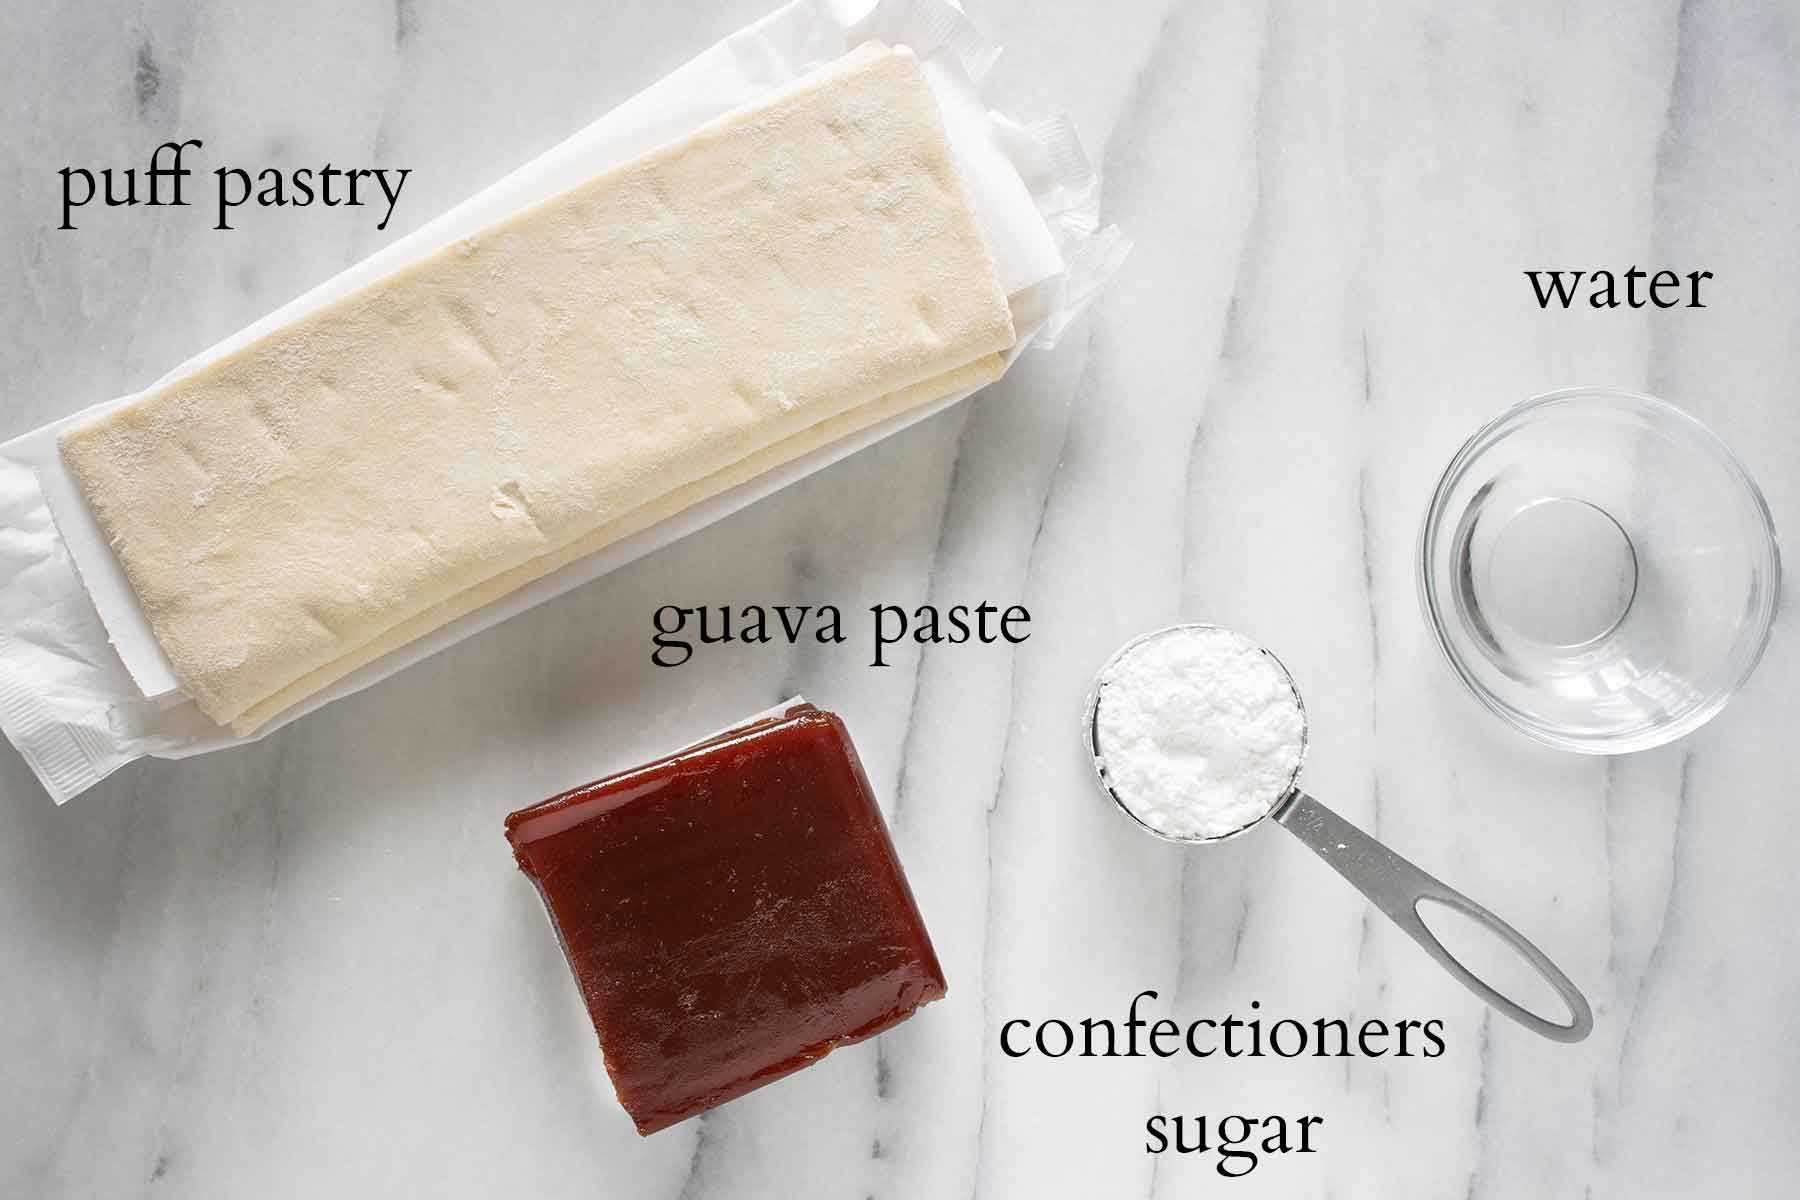 all the ingredients necessary to make guava pastries.